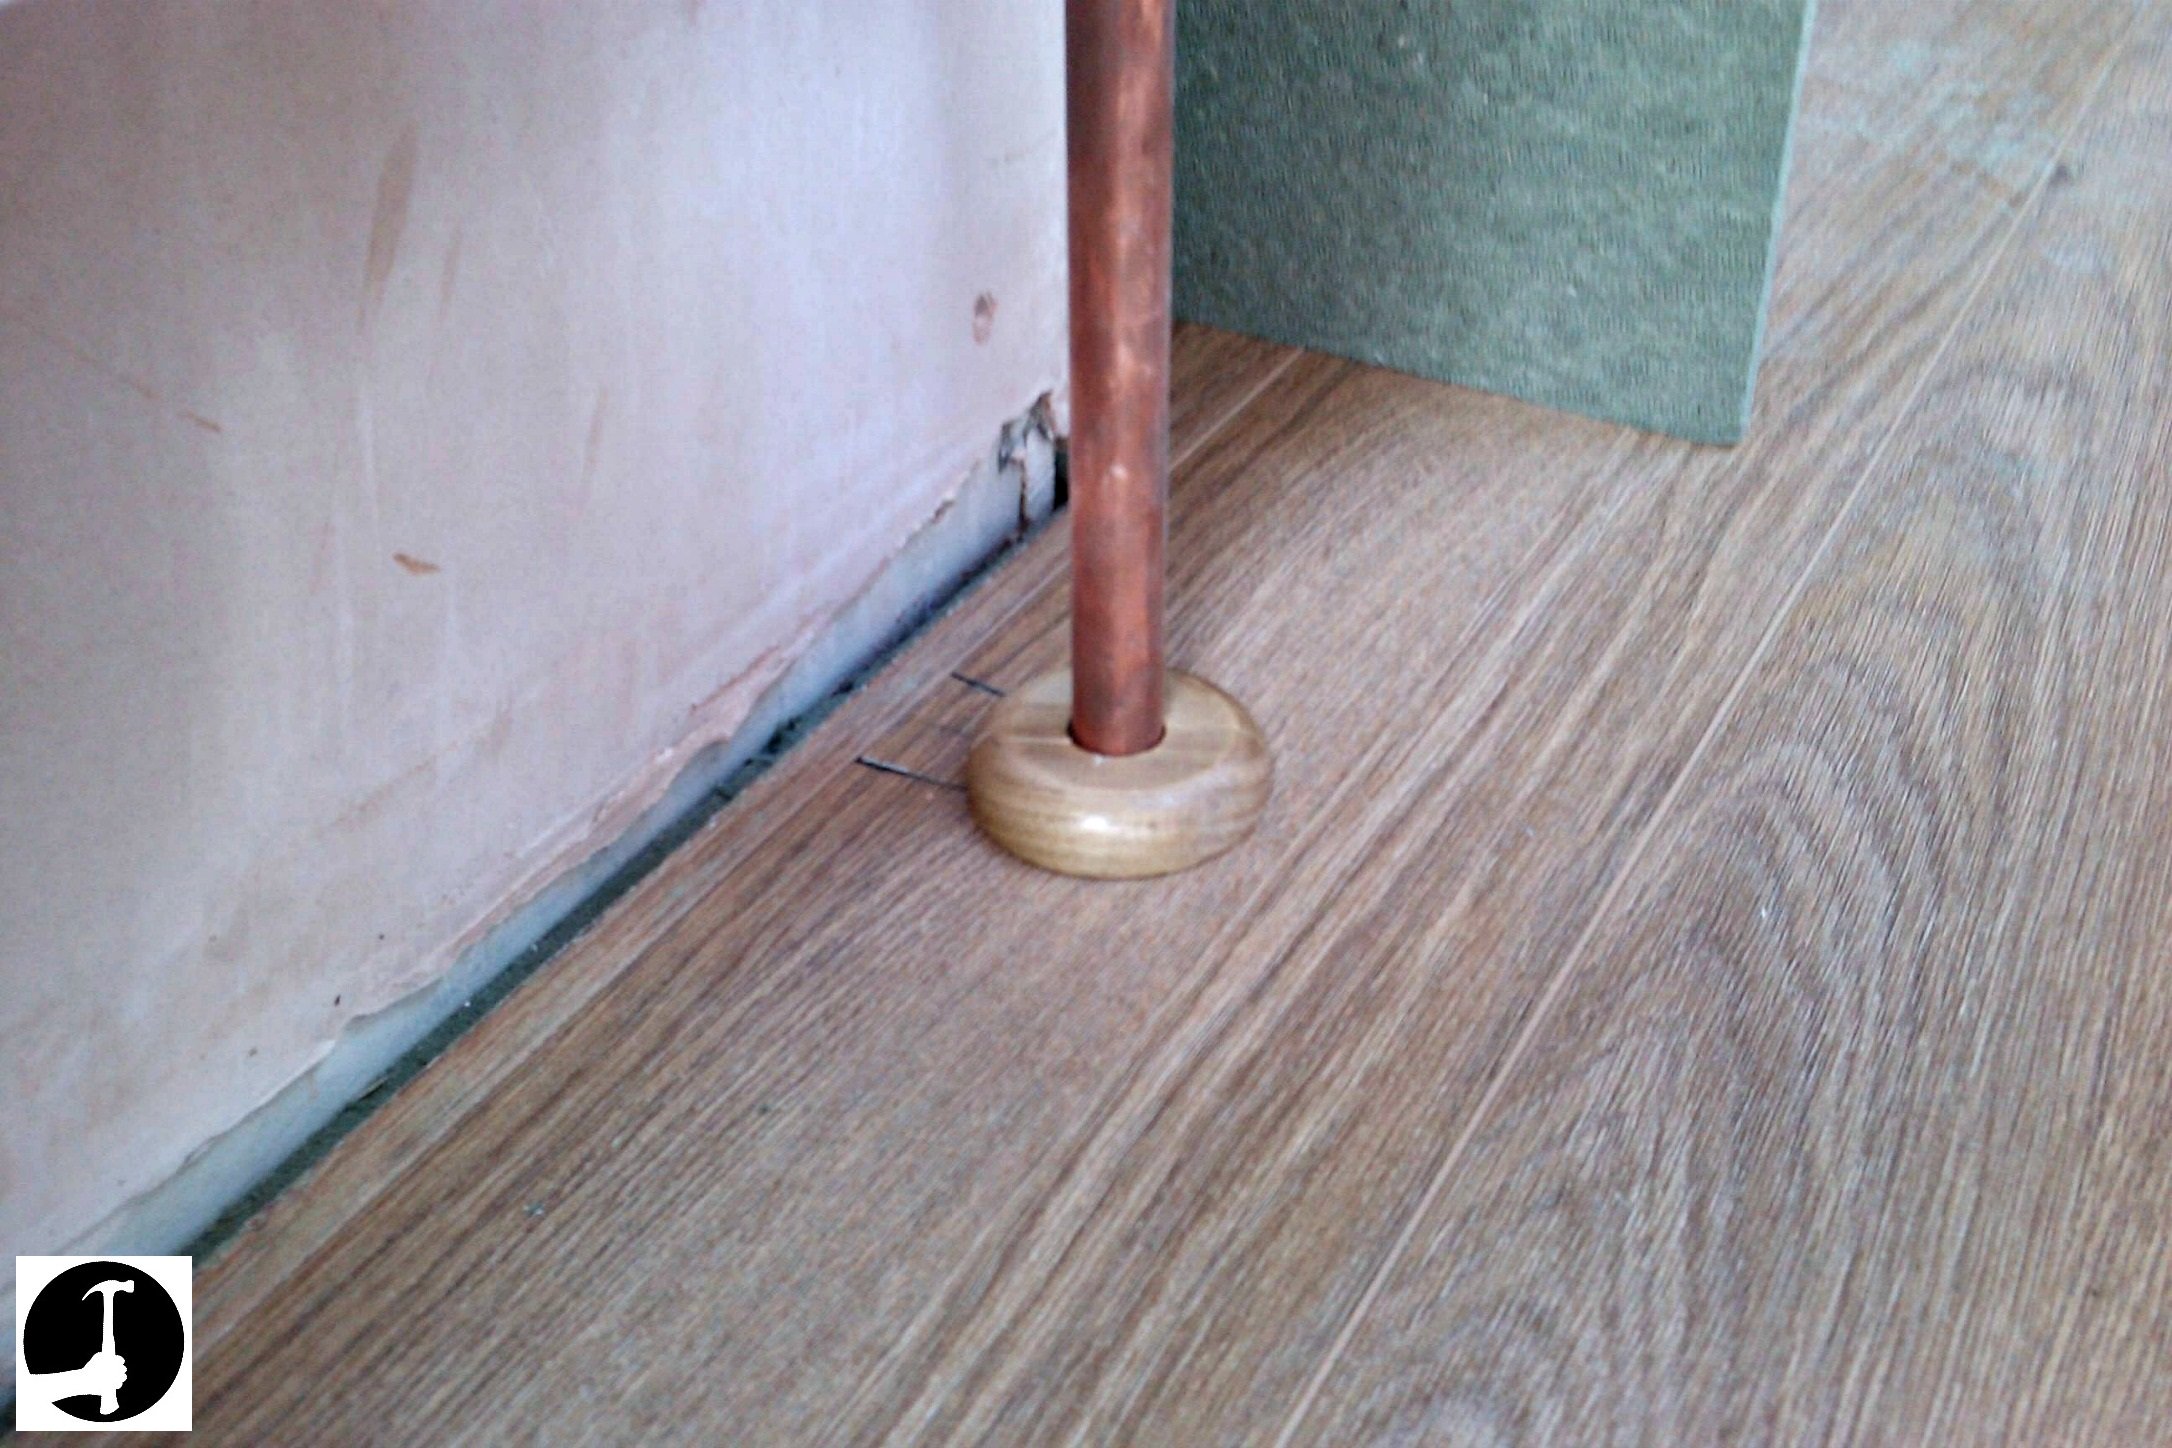 See How I Install Laminate Flooring To, How To Cut Vinyl Tile Around Radiator Pipes